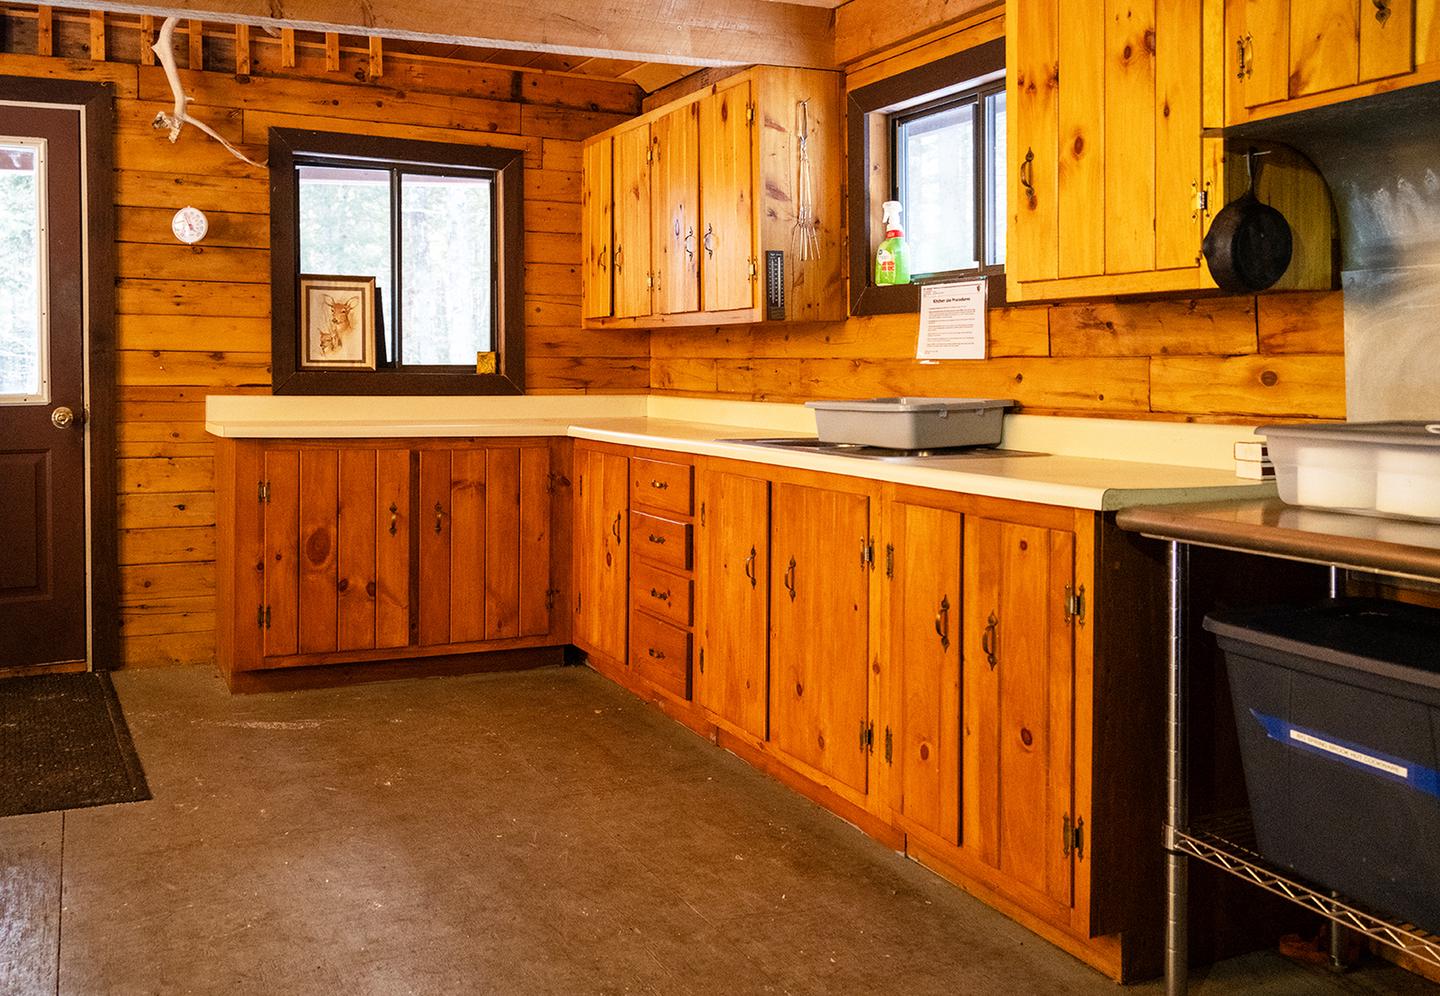 A kitchen space in a wooden cabin. A brown wooden door that leads outside is at the front. Big Spring Brook Hut has a large kitchen space and a door that leads to a porch outside.